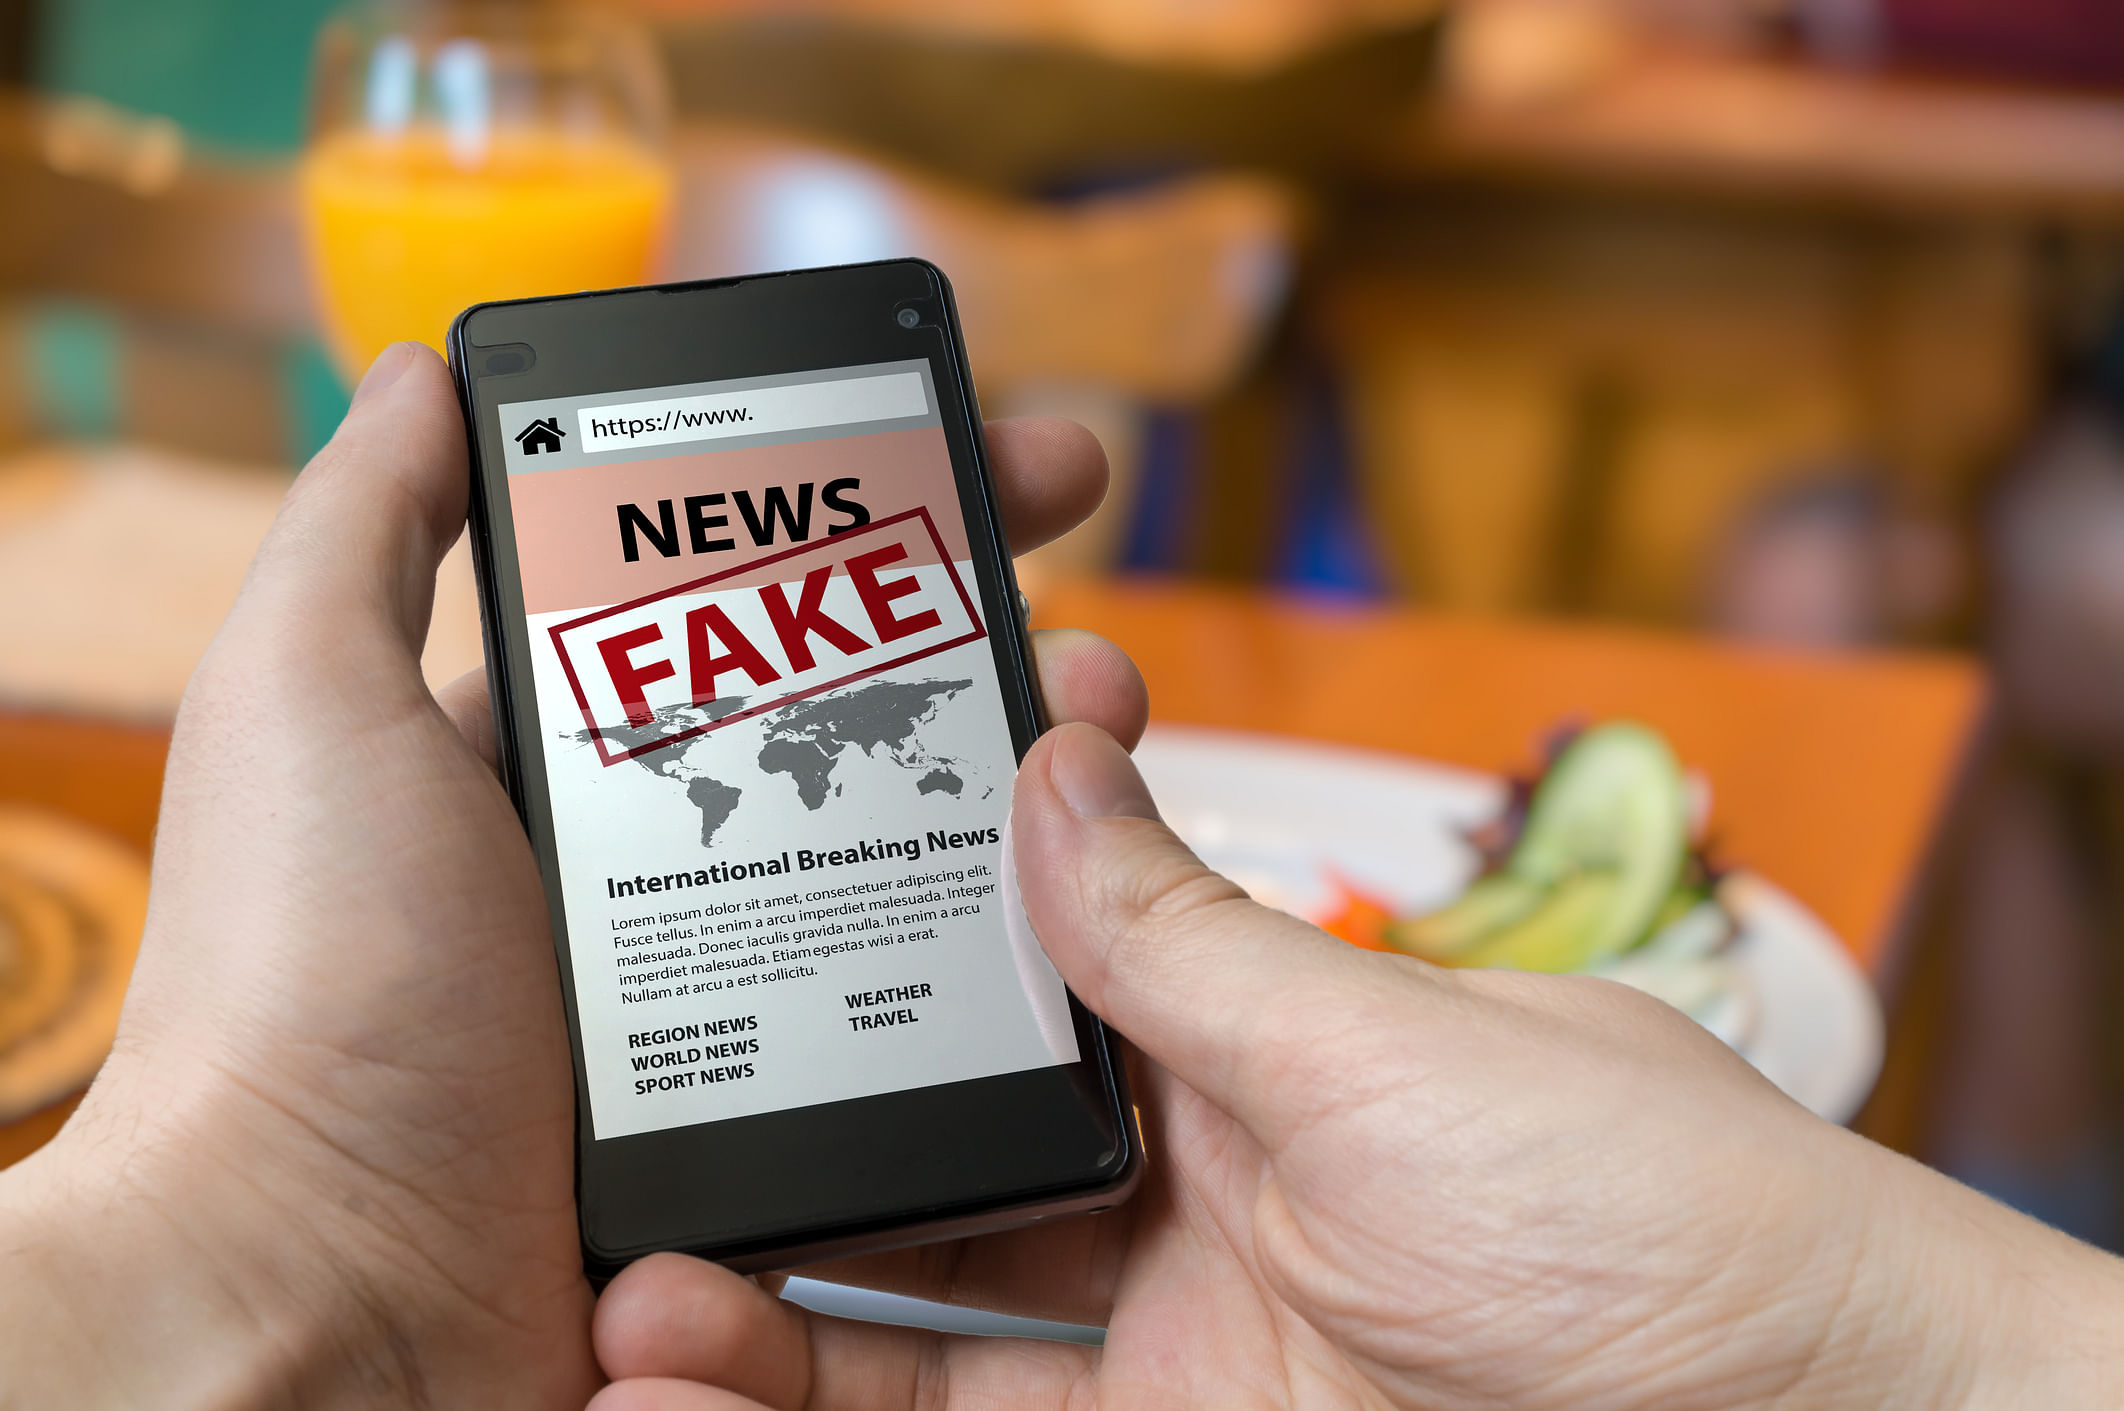 Union Electronics and IT Minister Ravi Shankar Prasad said the government had asked the social media companies to provide technological solutions to verify fake news and filter out provocative messages. Representative image